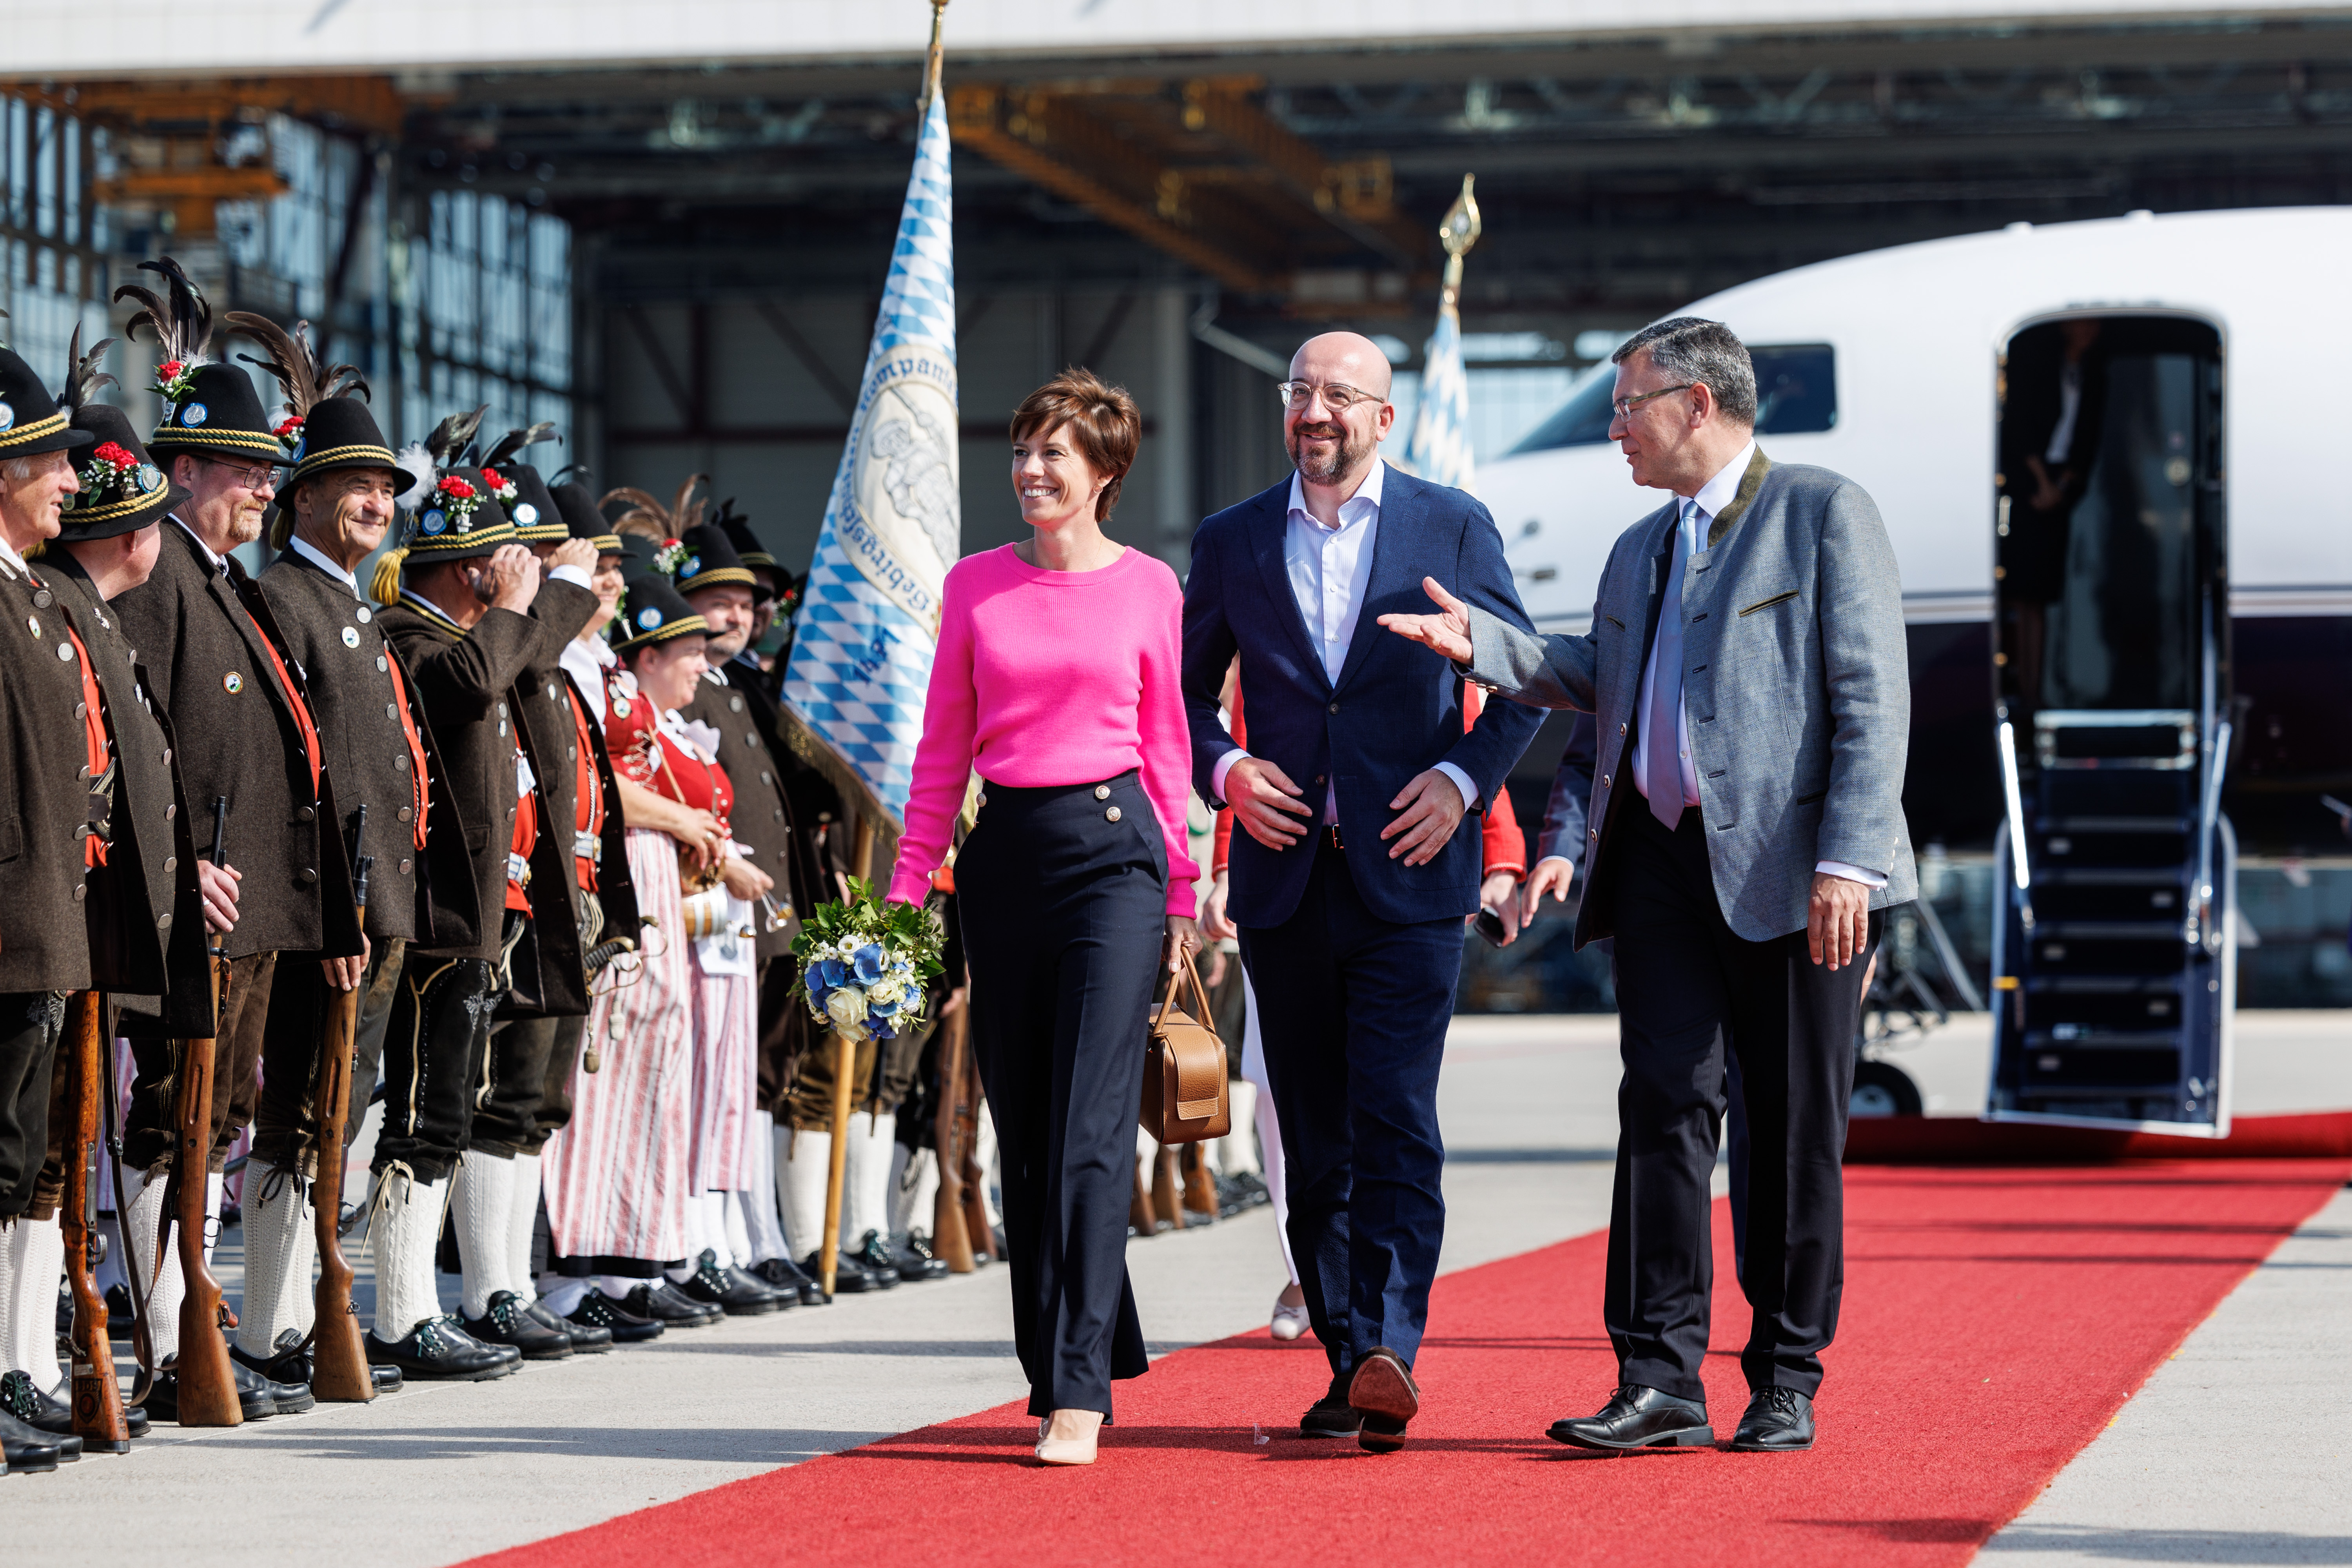 Arrival of Charles Michel (President of the European Council) and his wife Amélie Derbaudrenghien at Munich Airport and welcome by Florian Herrmann, Head of the Bavarian State Chancellery.